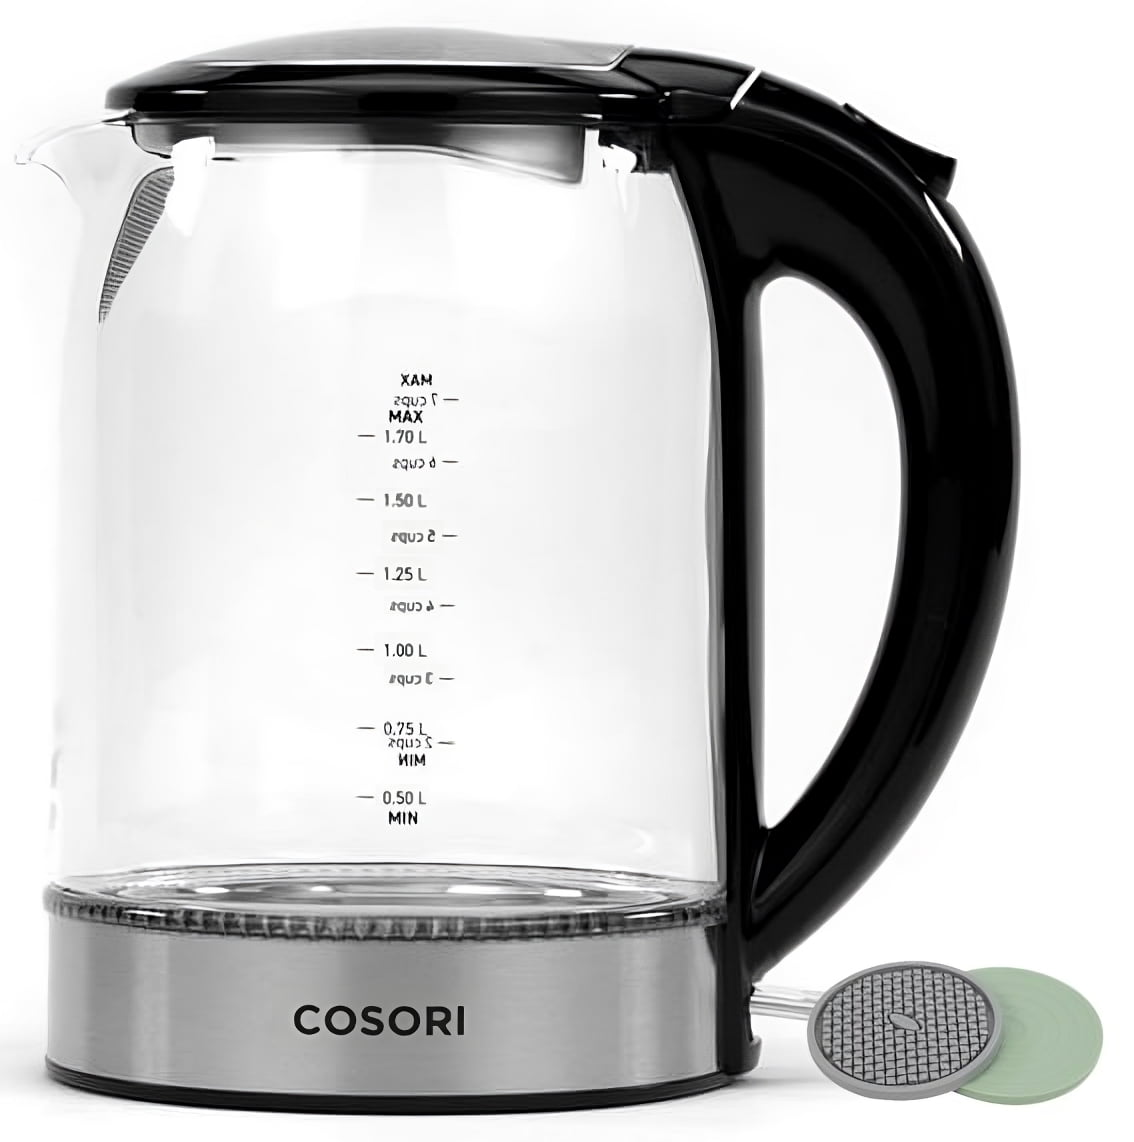 Discovering the Cosori Original Electric Glass Kettle: A Unboxing  Experience #HealthyKitchen101 